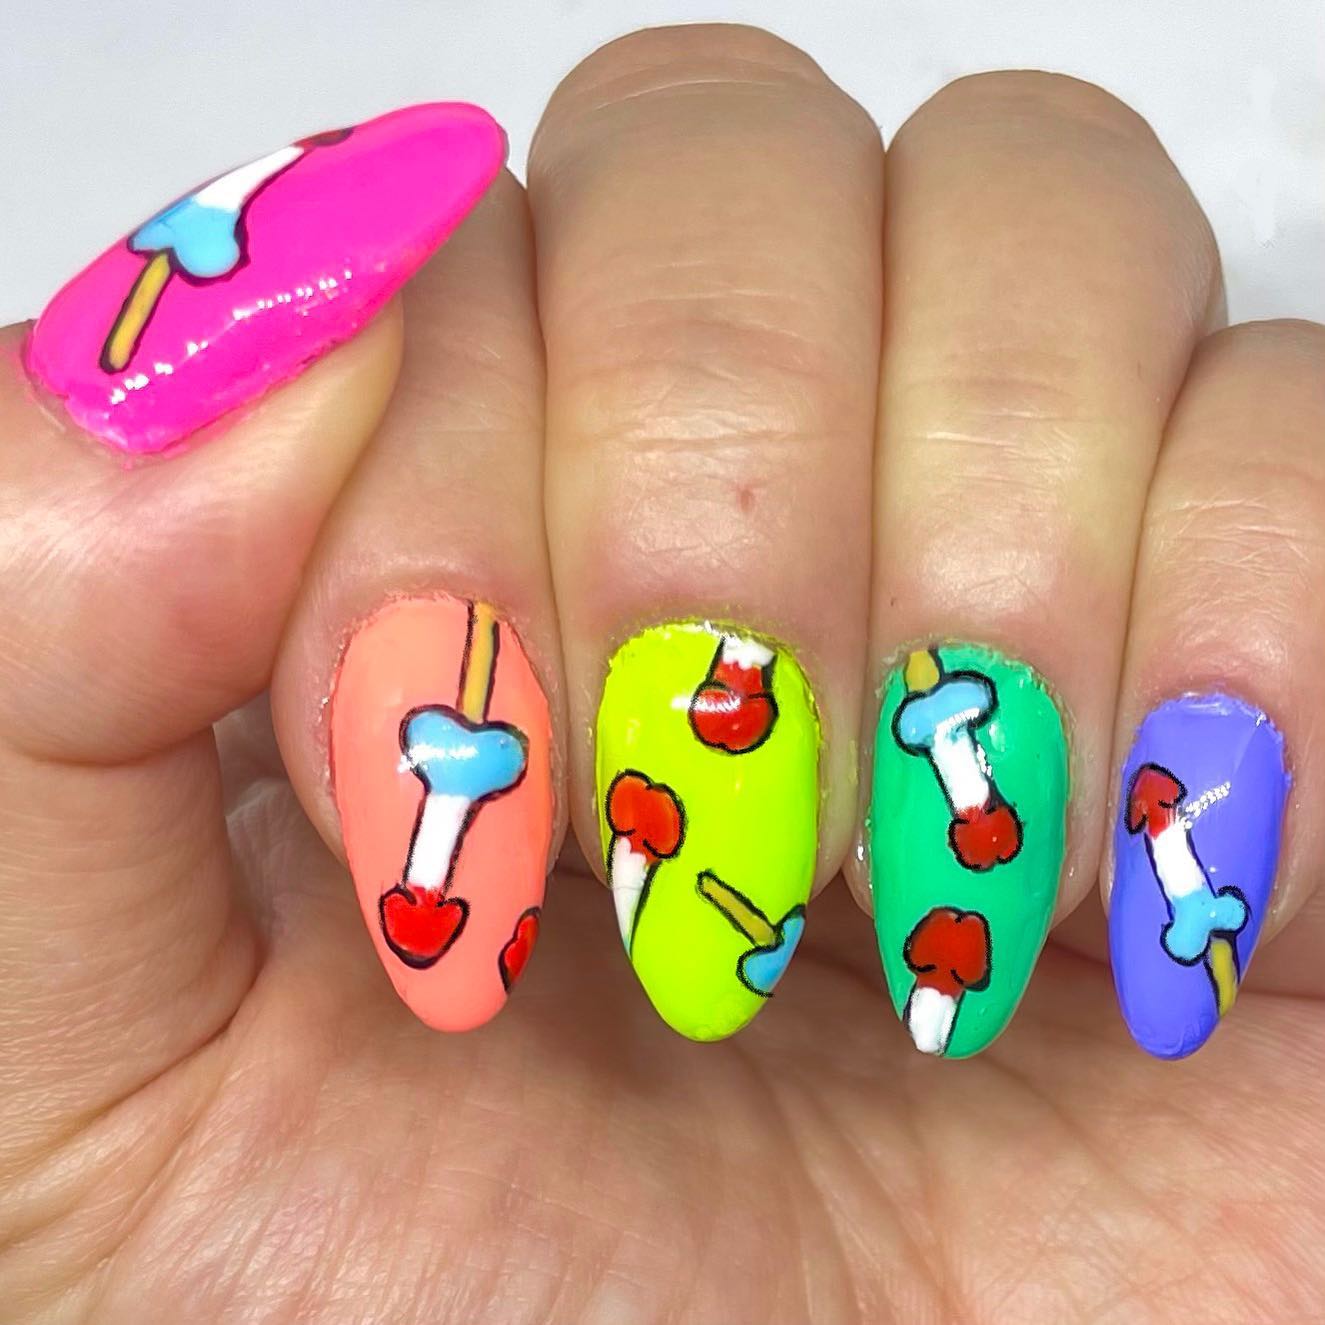 Neon nail polishes are perfect to wear in sunny days, aren't they? On top of your beautiful neon nails, you can add some super-normal popsicles!